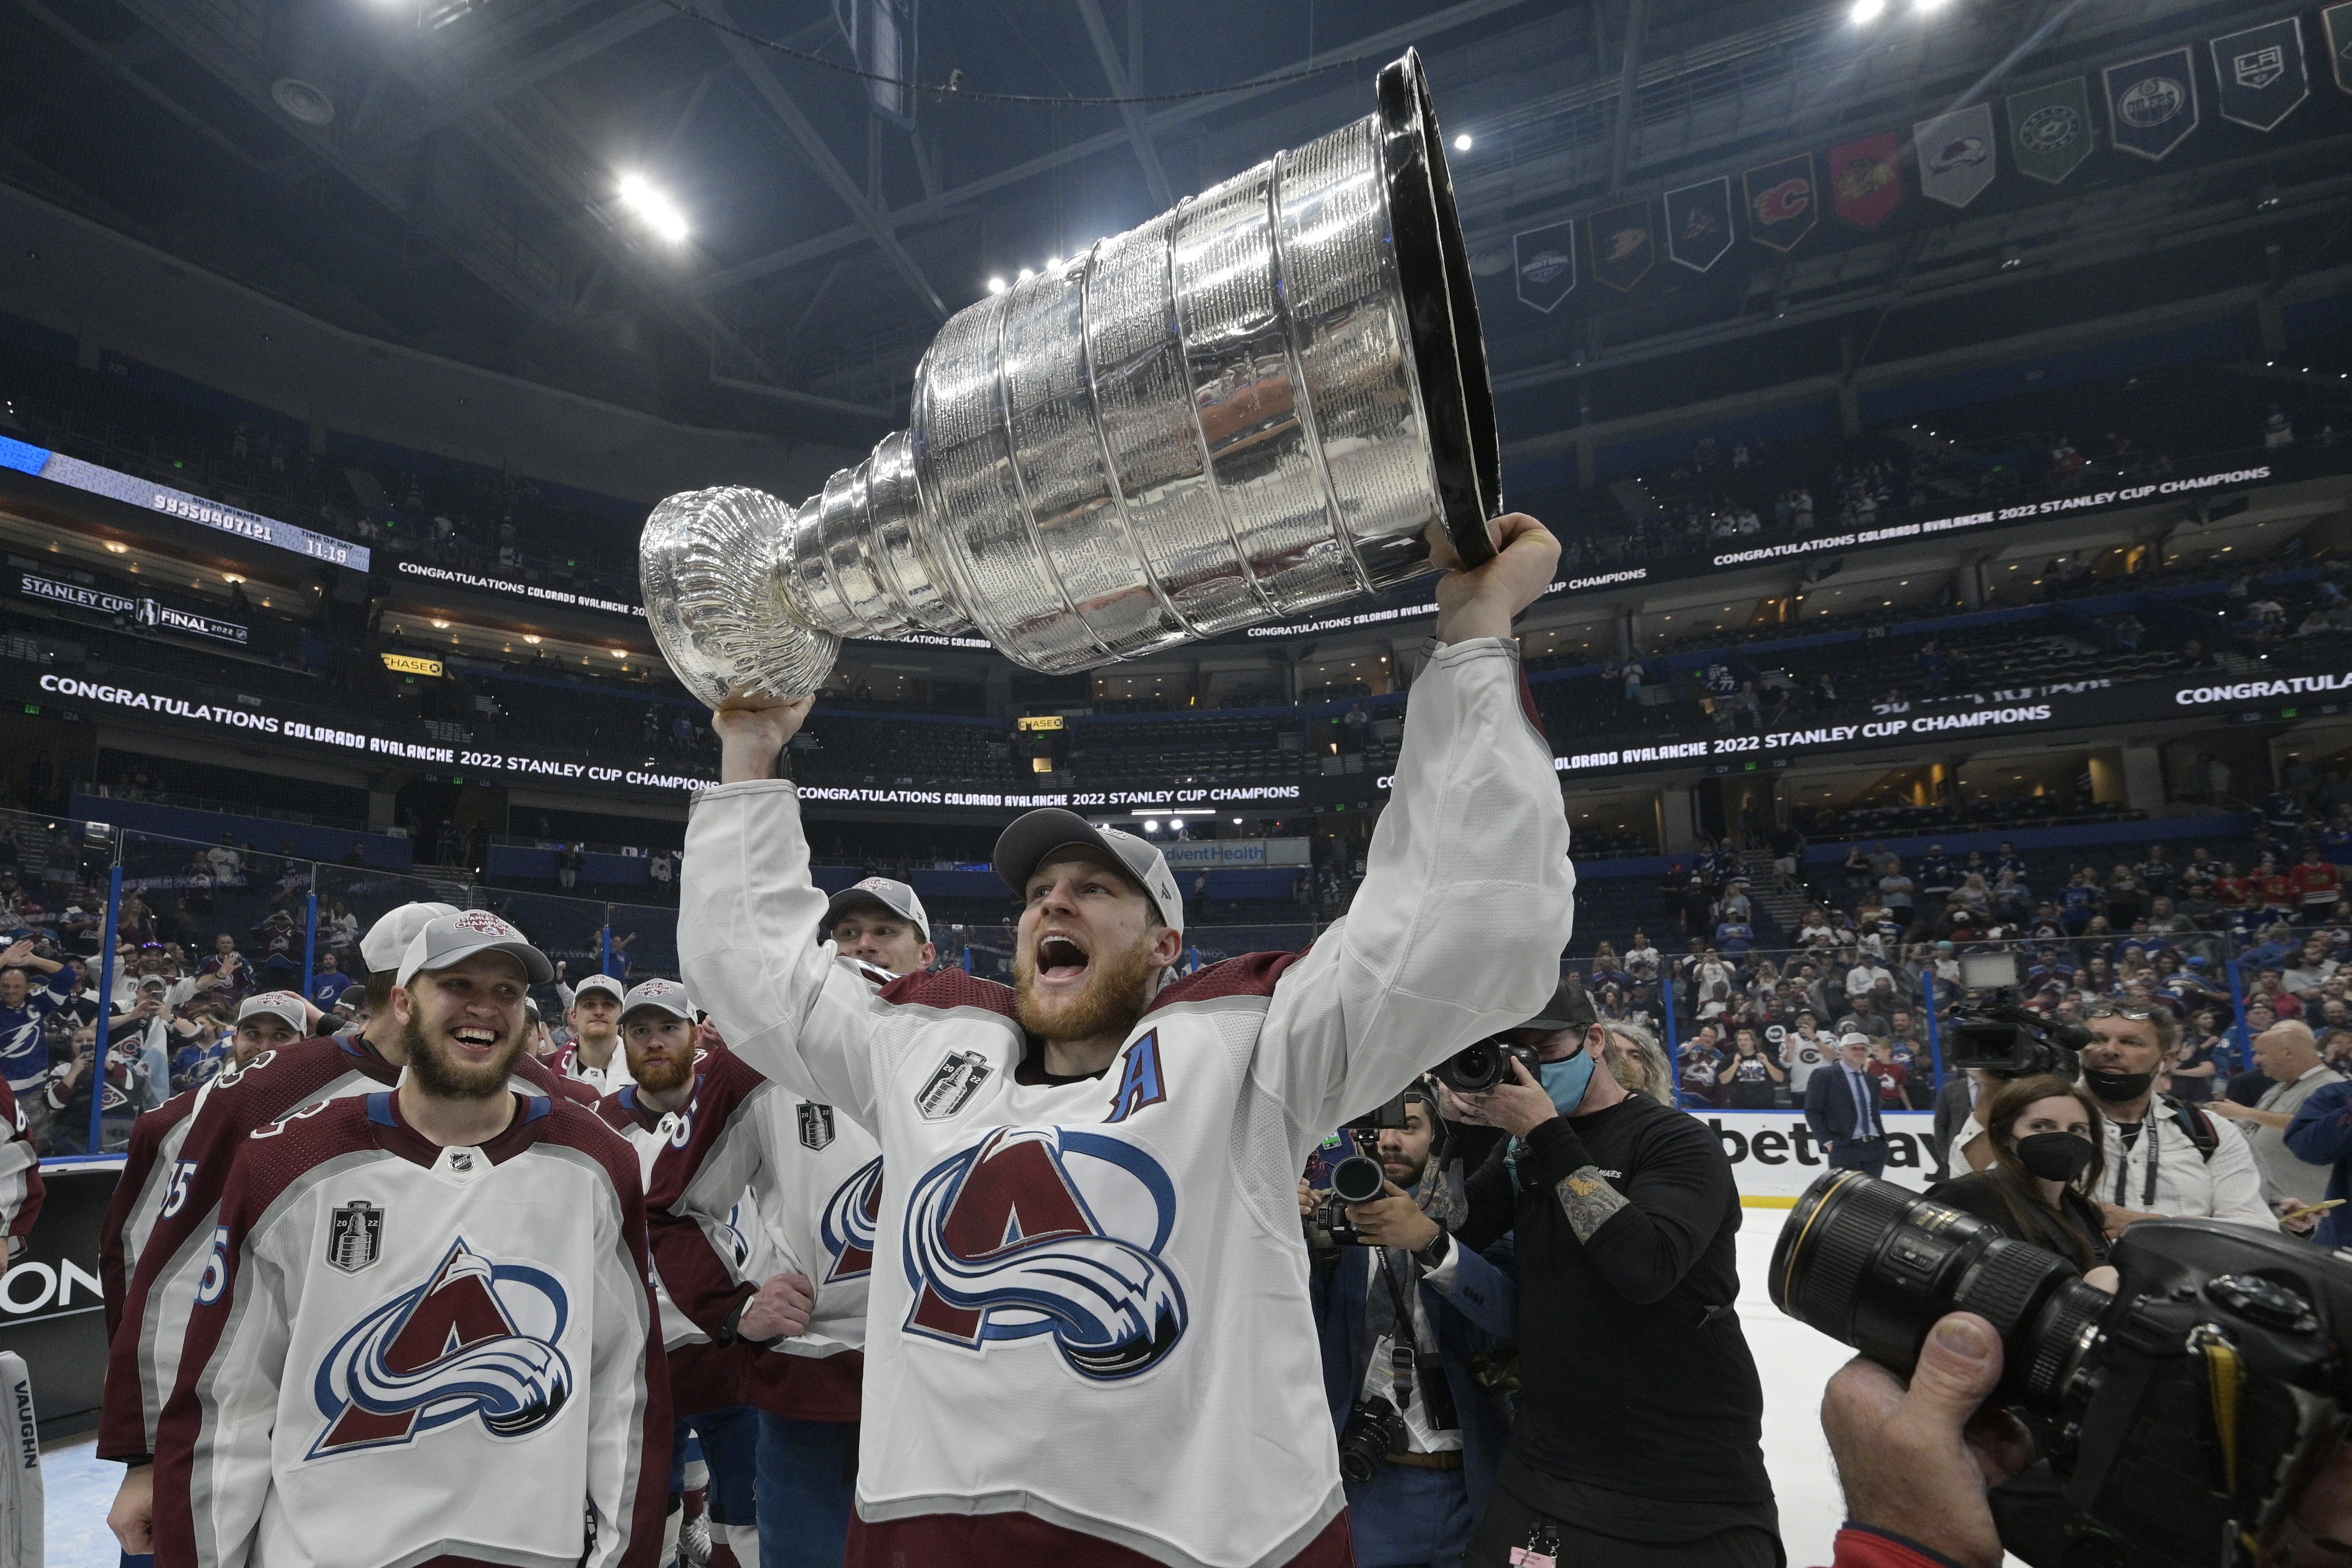 Colorado Avalanche Fans' Favorite Thing is 'All the Small Things